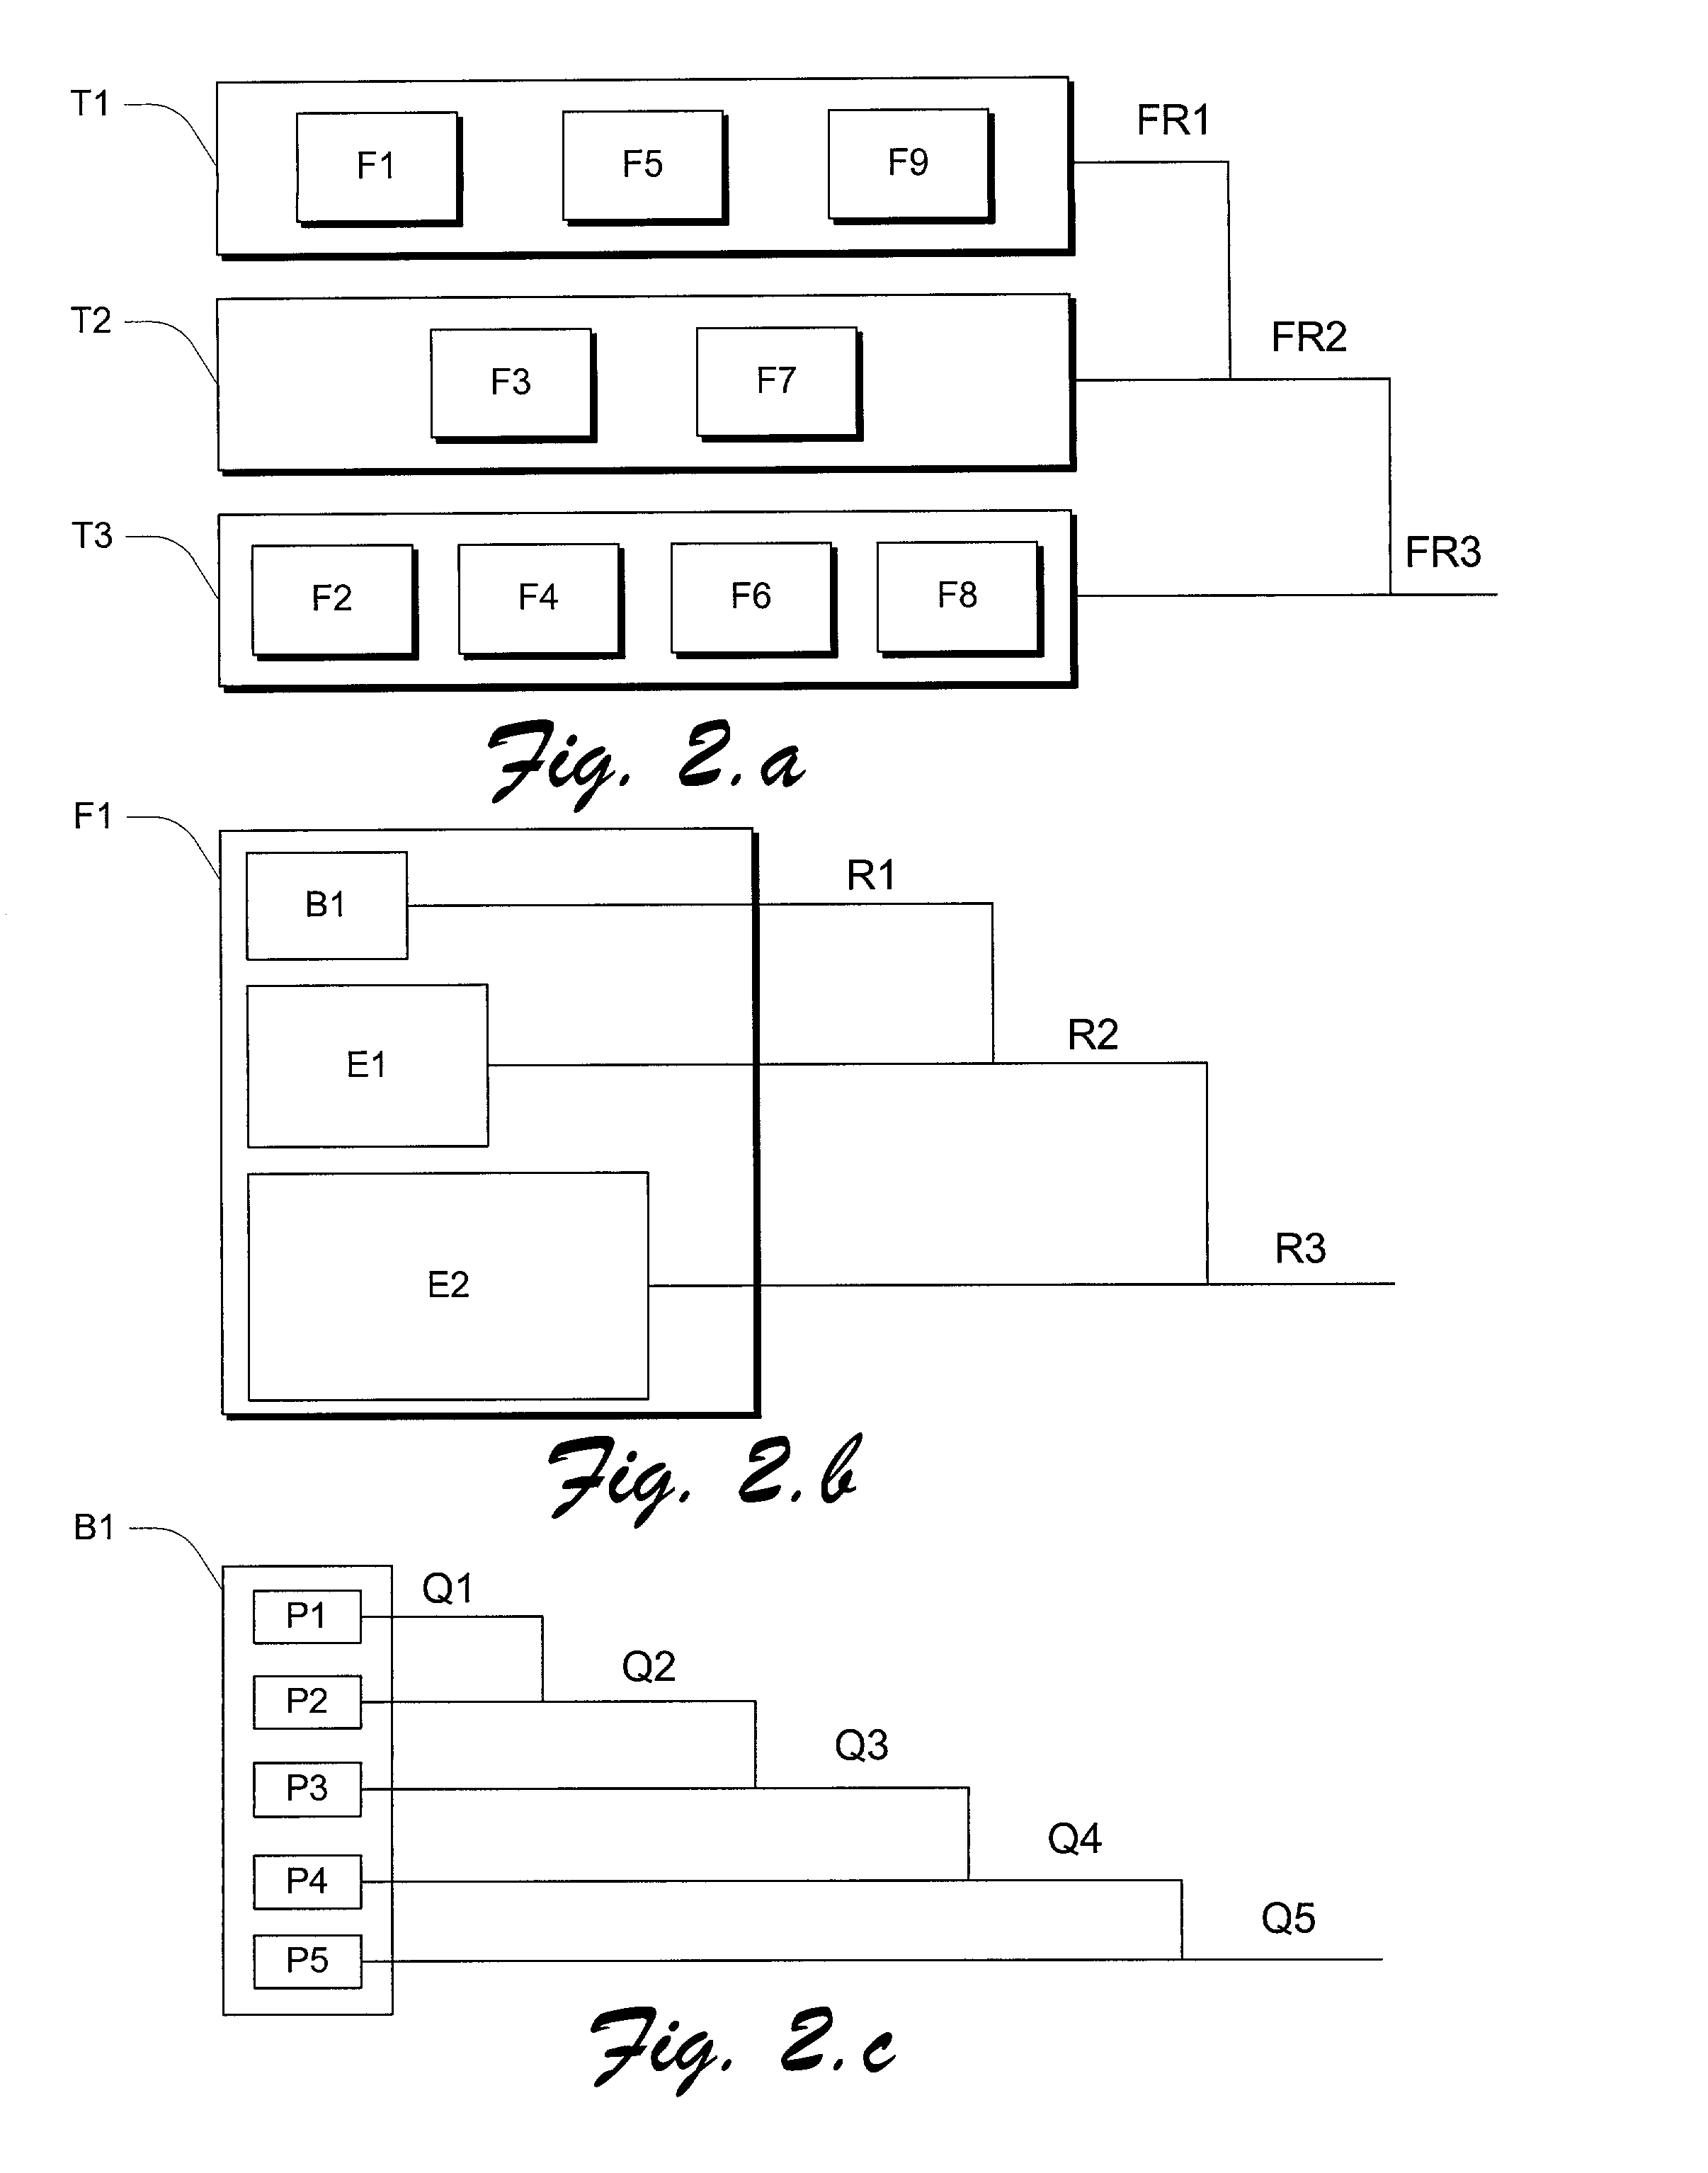 Multimedia compression system with additive temporal layers